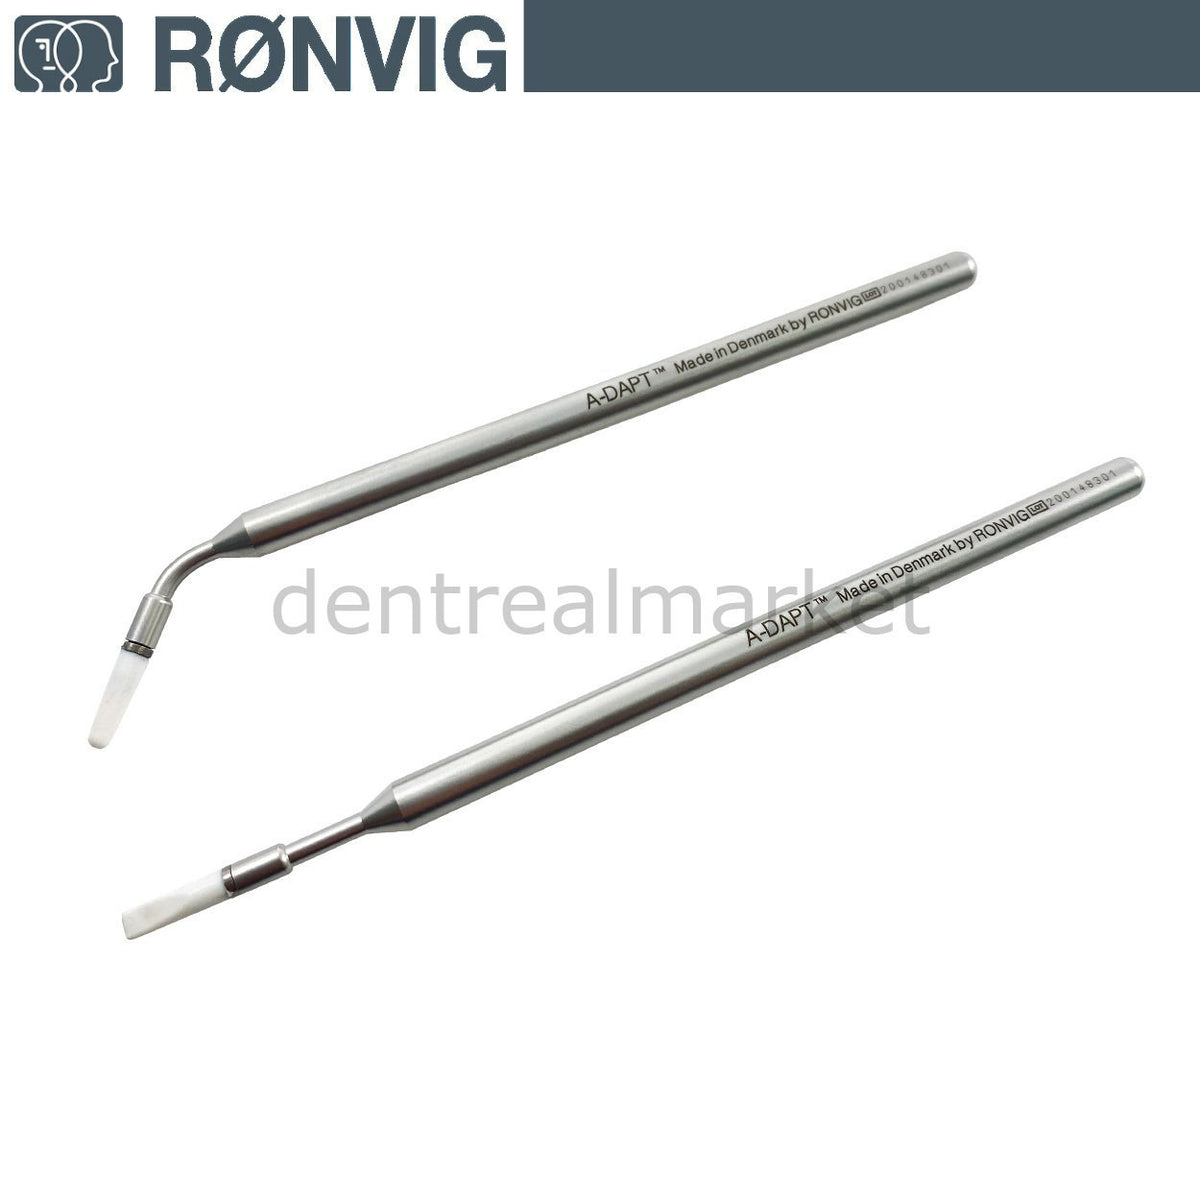 DentrealStore - Ronvig A-Dapt Aesthetic Silicone Composite Shaping Tool